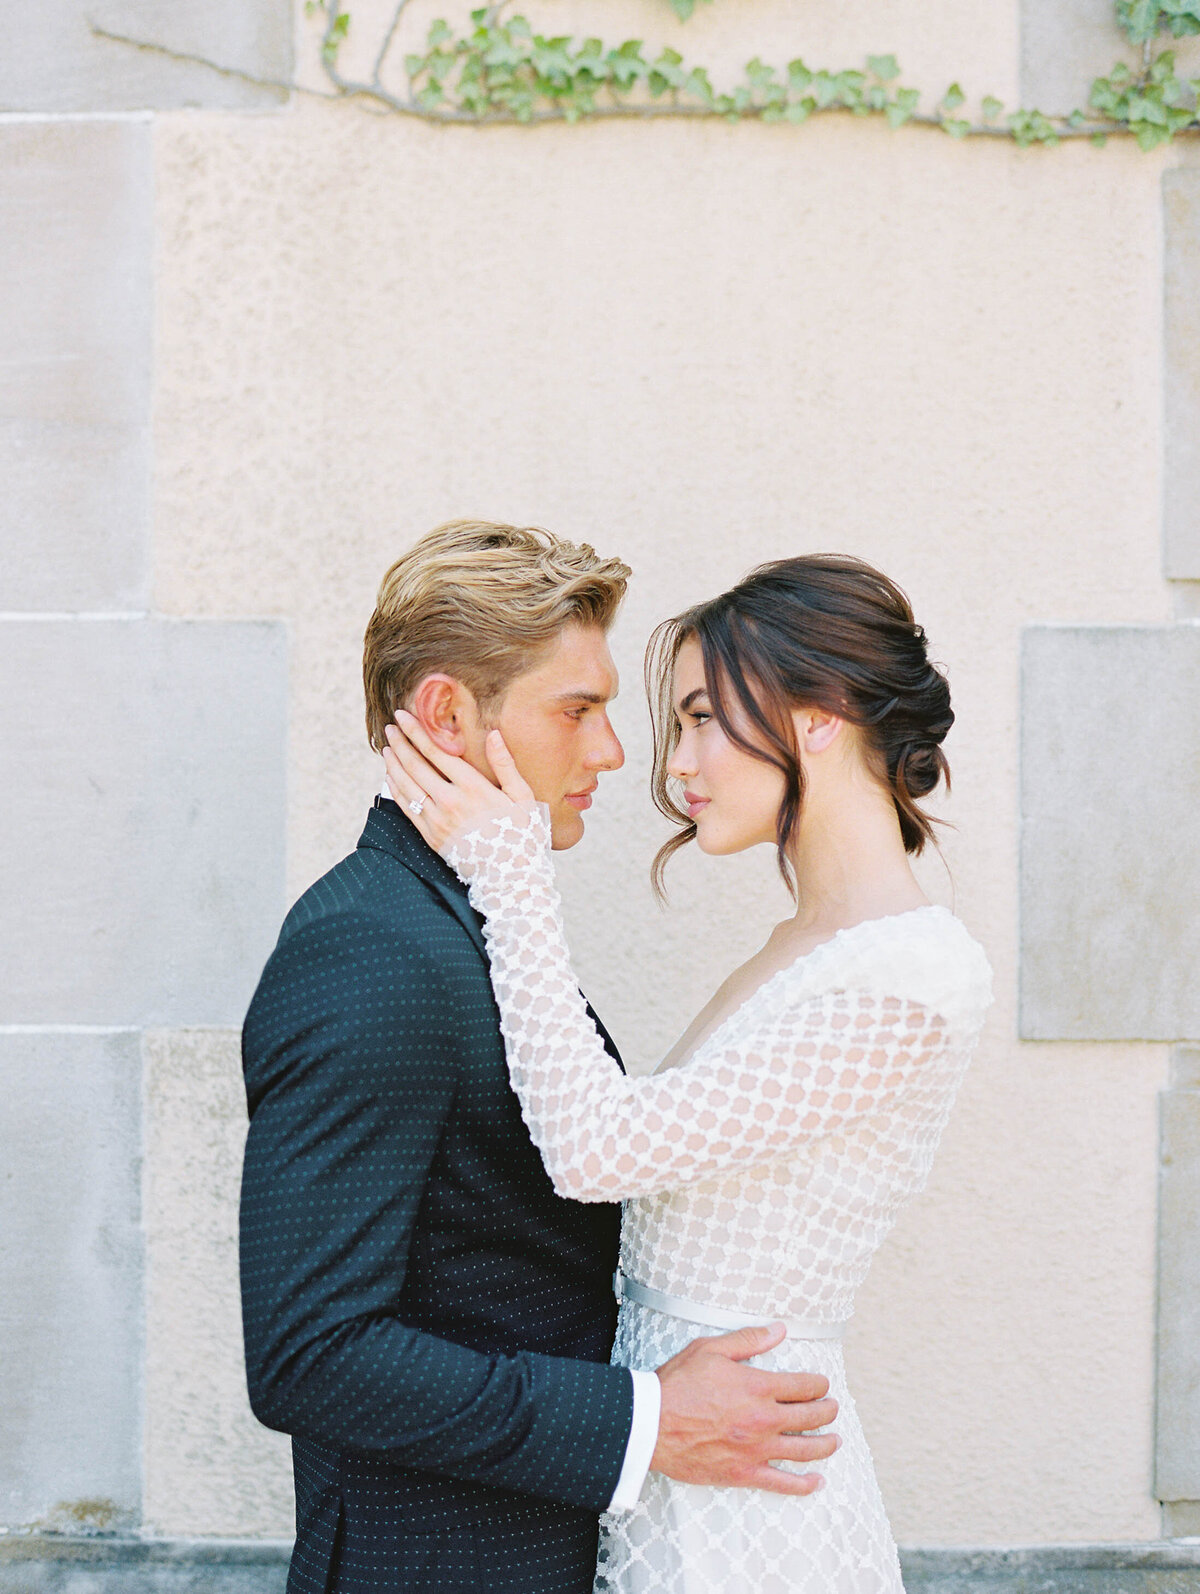 Oheka Castle Wedding, Photo by Katie Trauffer, Styled by Rachael Ellen Events, Hair and Makeup by Caitlyn Meyer